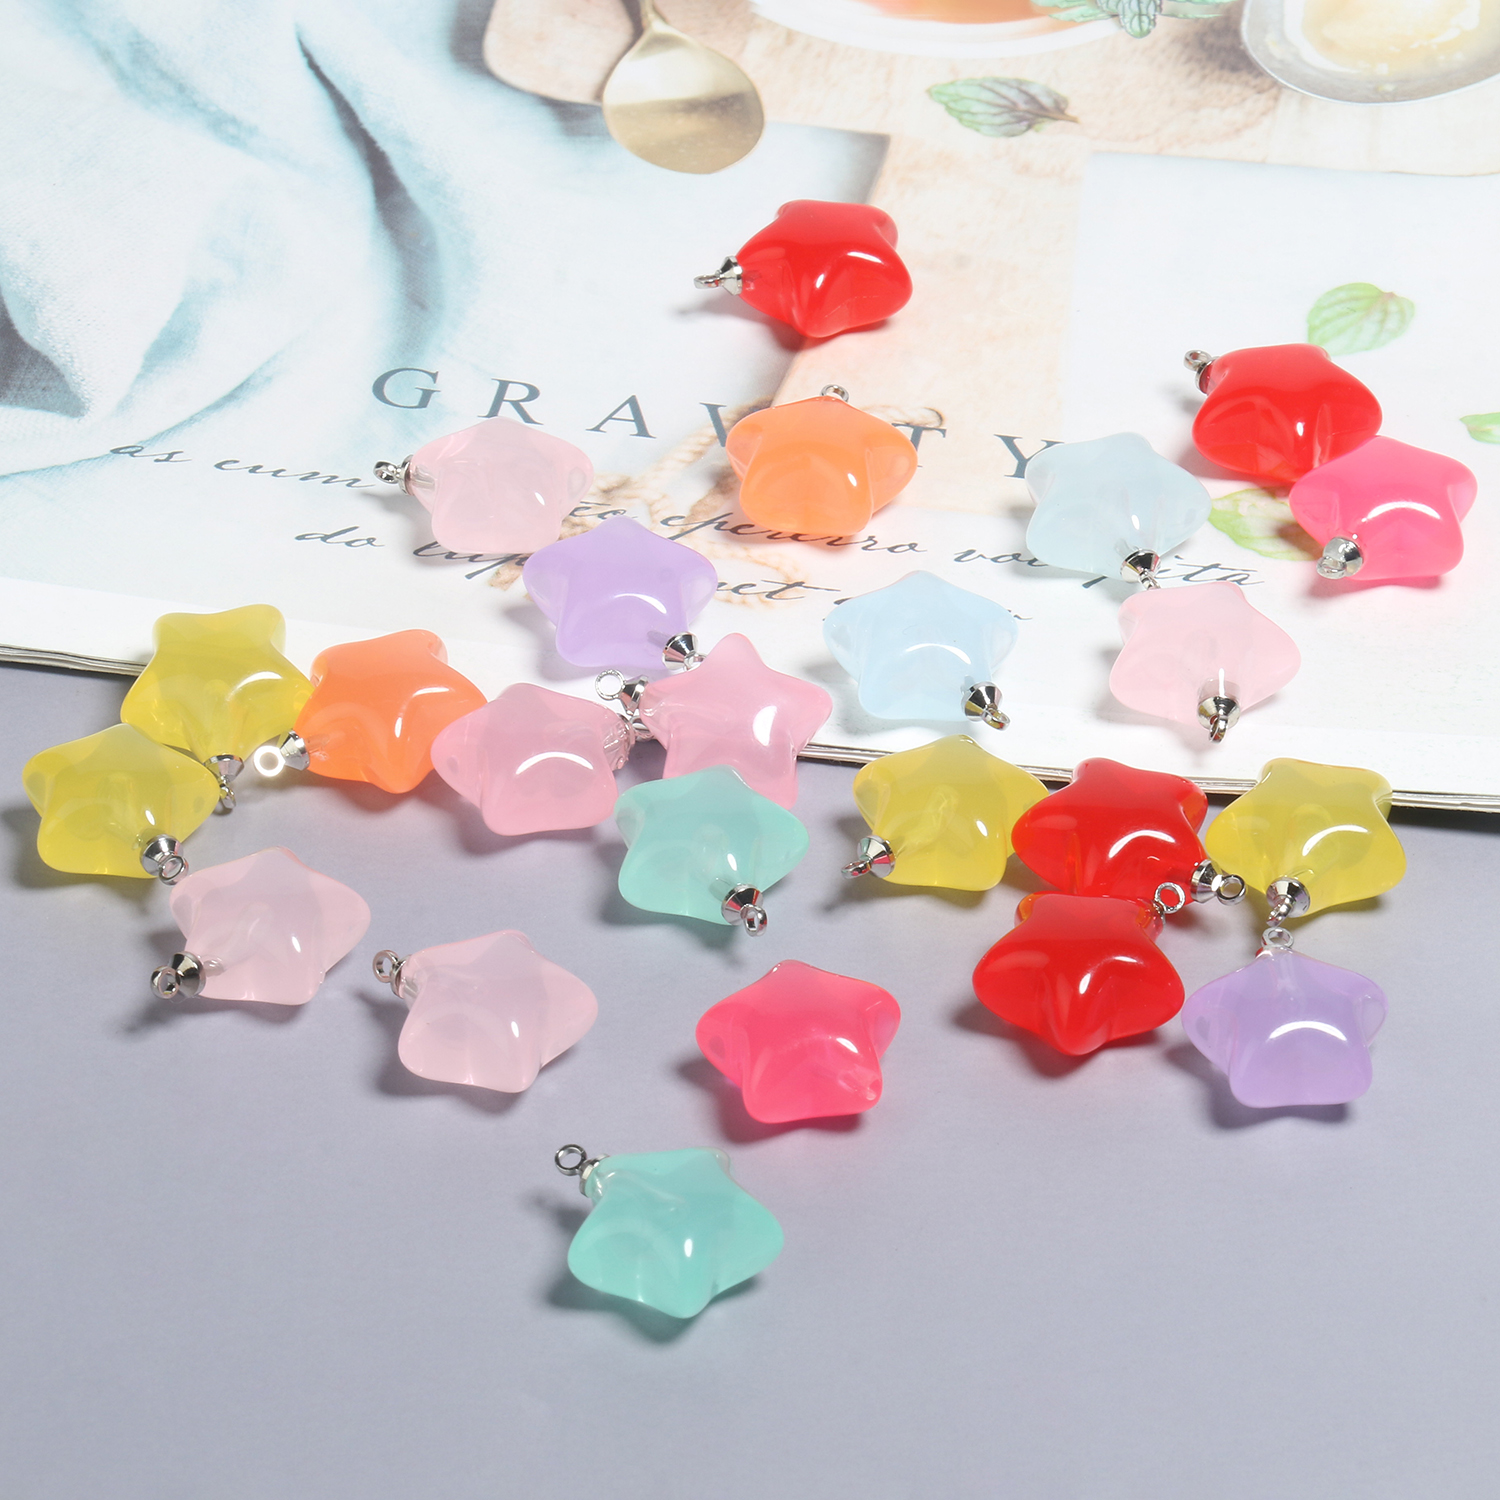 10Pcs Cute Mini Egg Yolk Resin Charms For Jewelry Making Key Chain Necklace  Pendant DIY Decoration Accessory C920